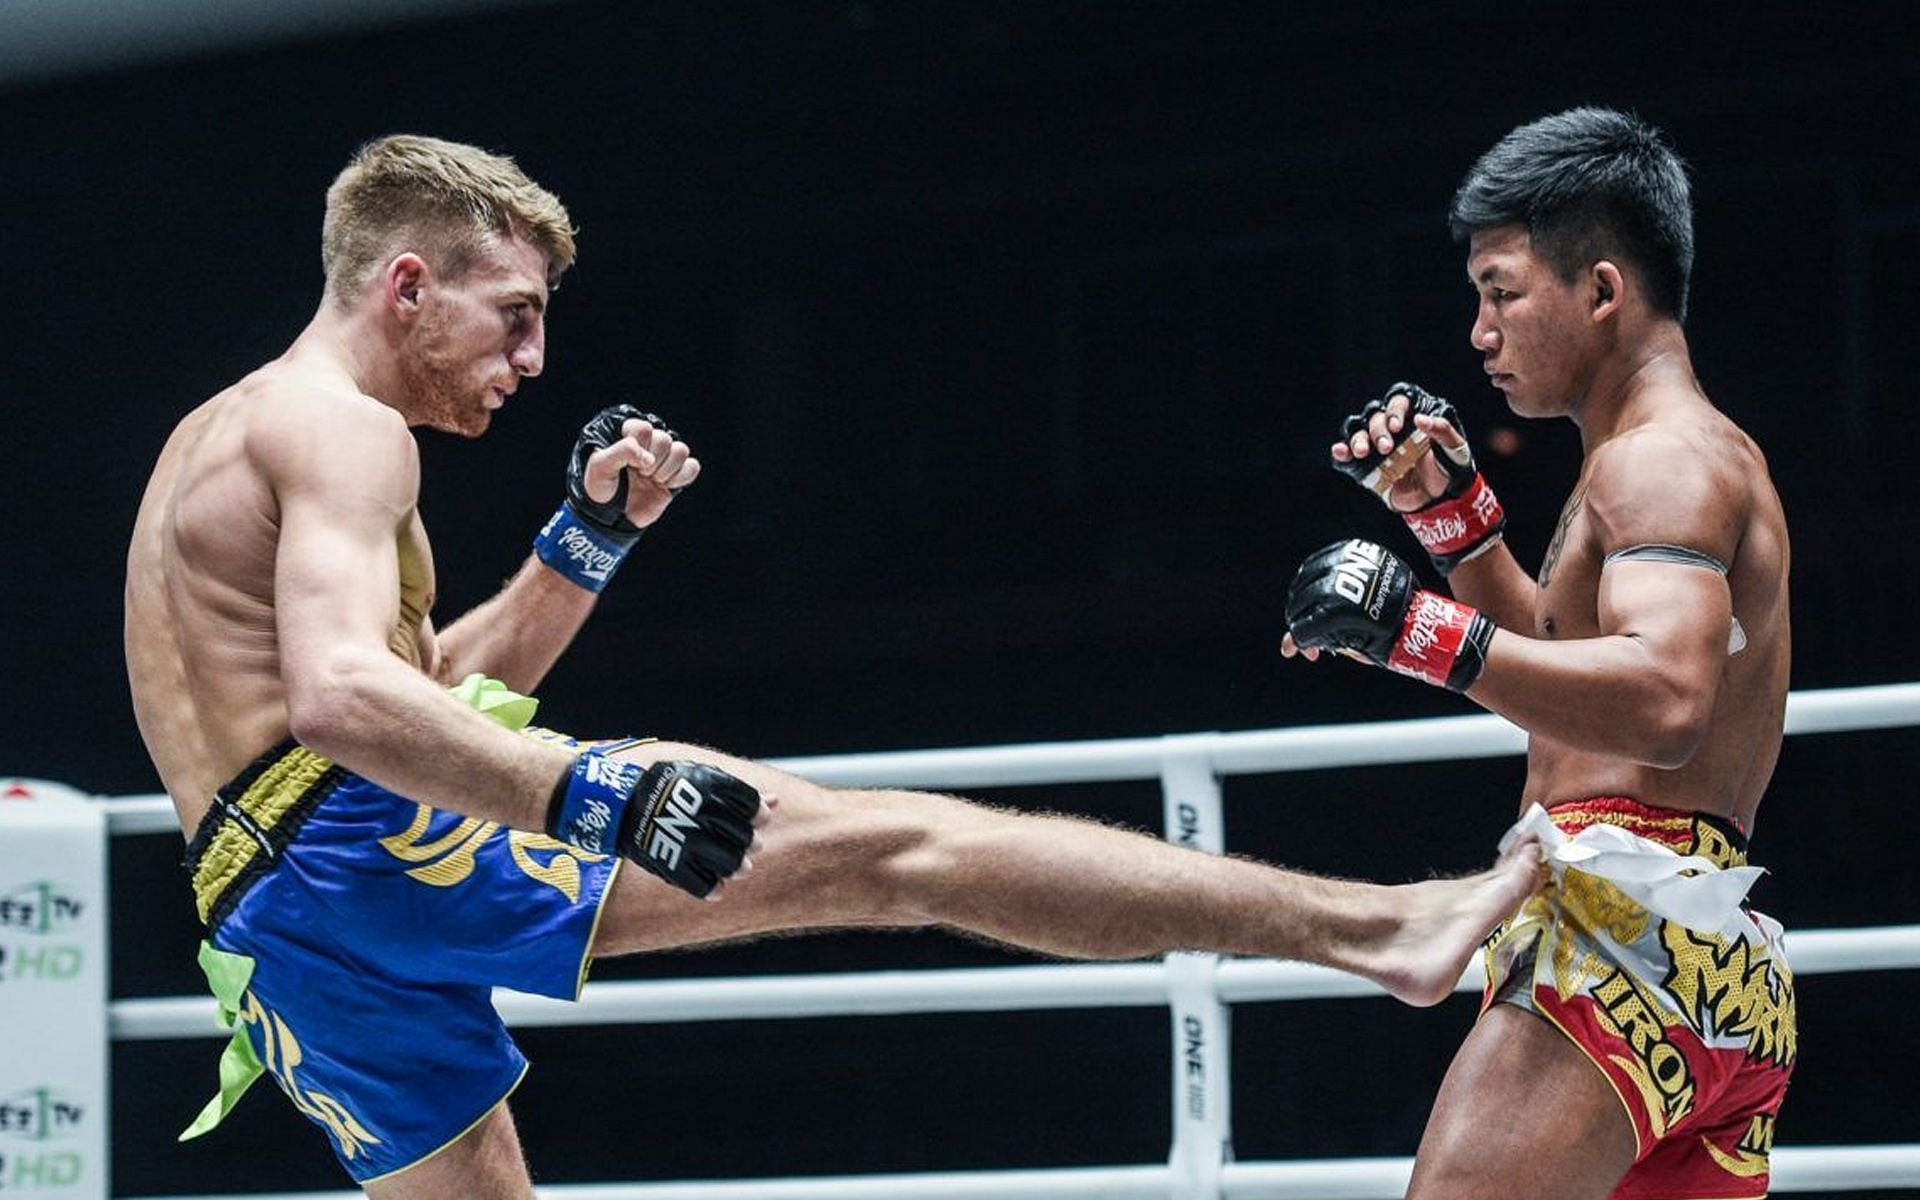 Jonathan Haggerty (L) could face Rodtang Jitmuangnon (R) for a third time if they both advance in the World Grand Prix. | [Photo: ONE Championship]